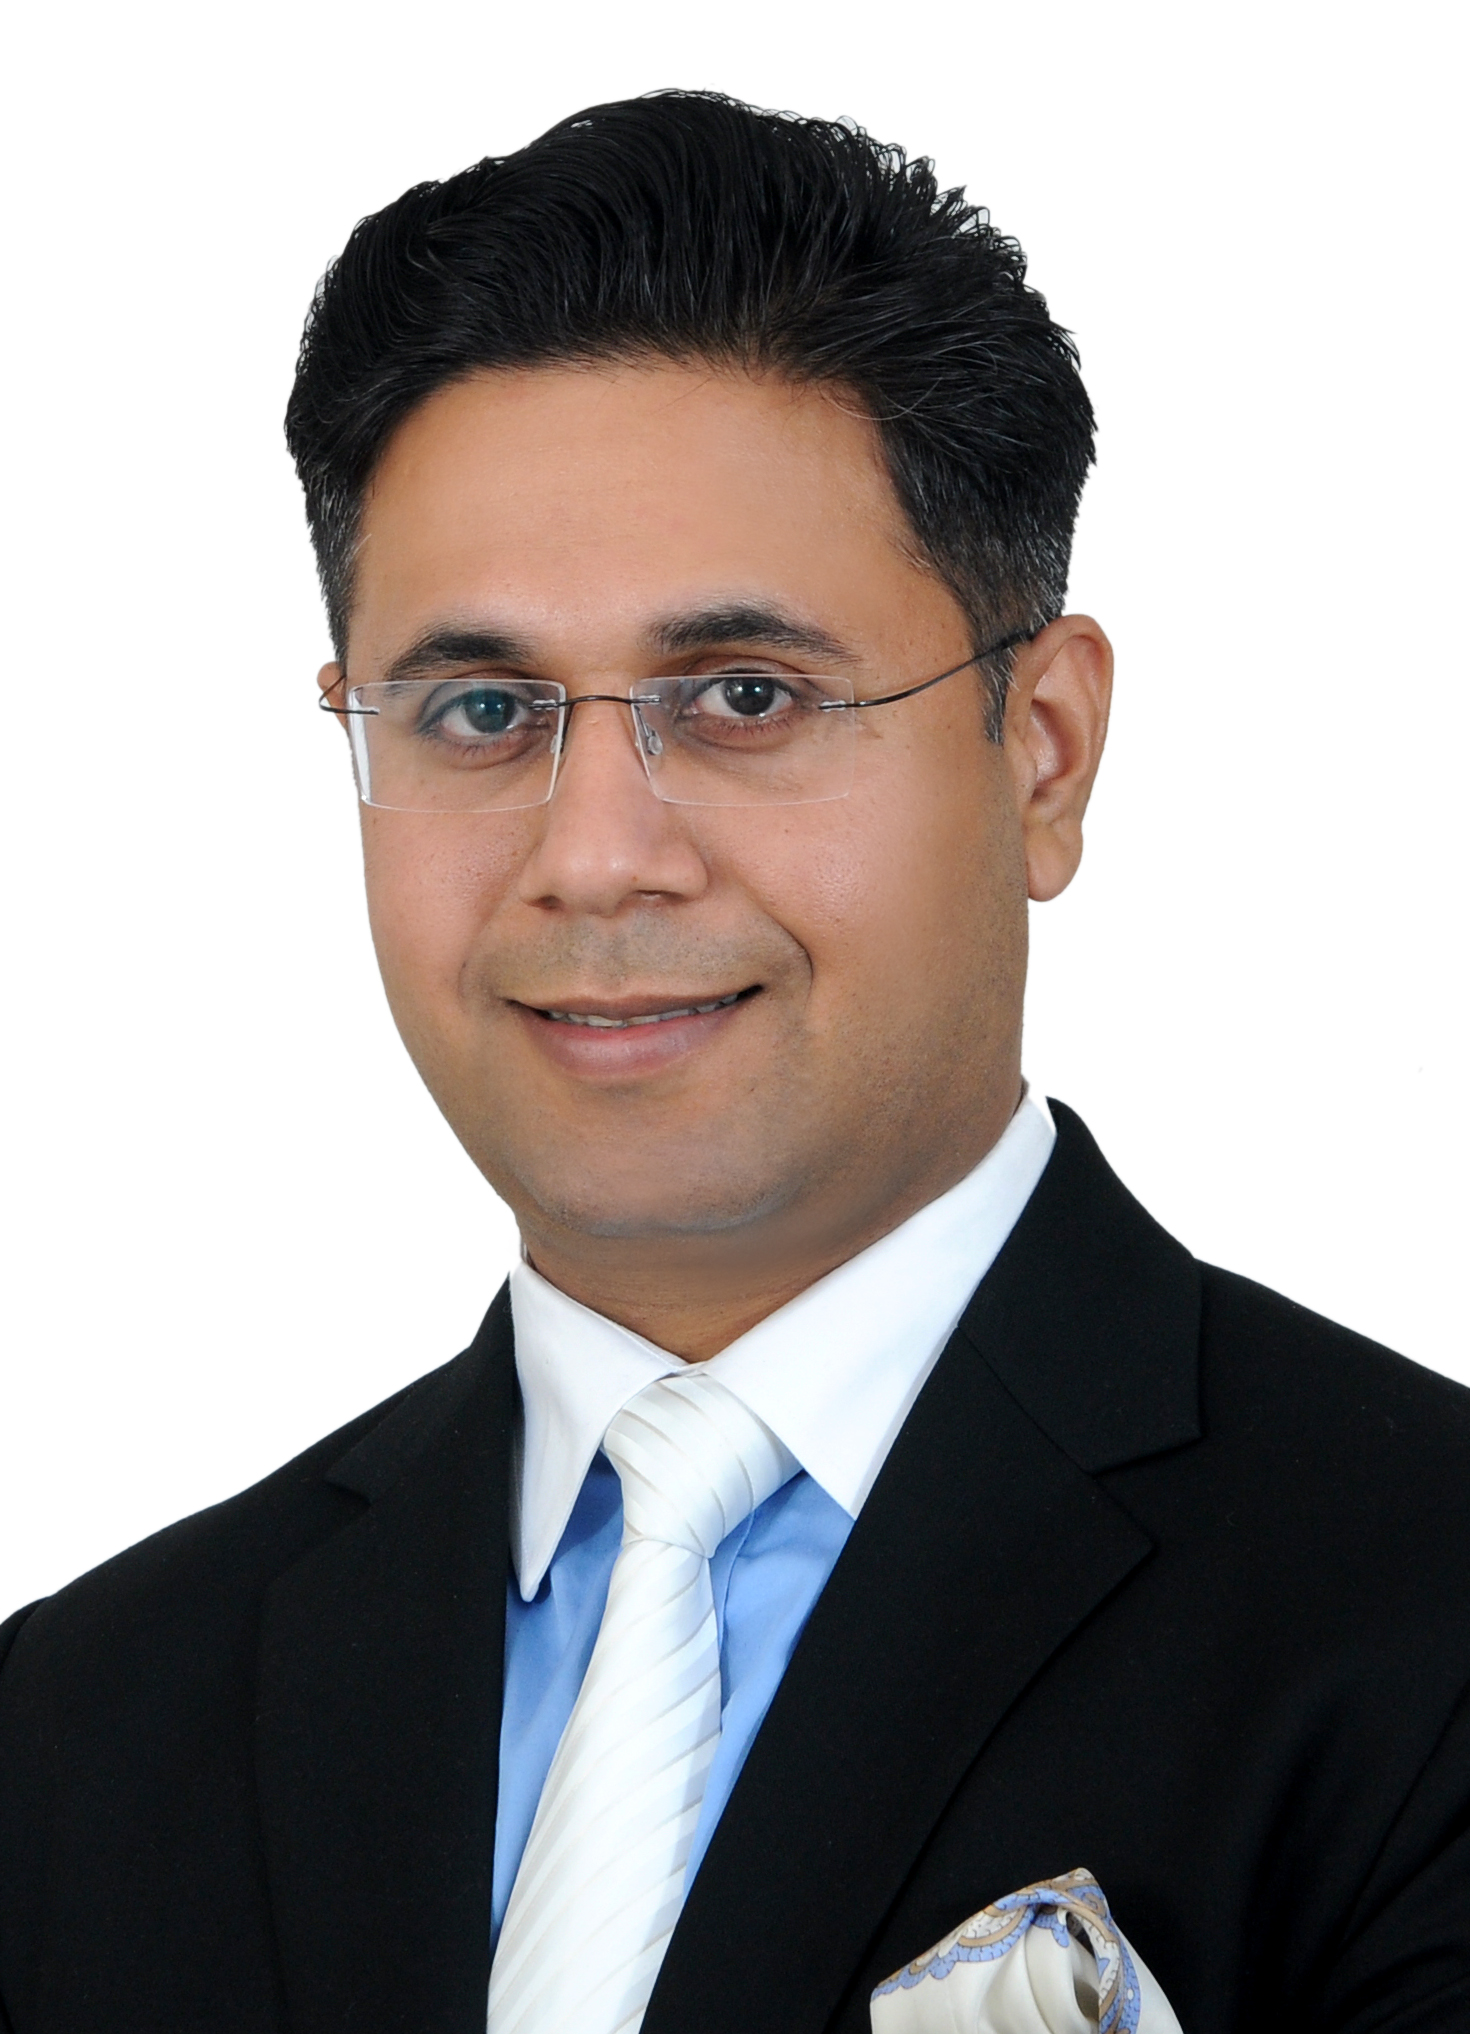 Radisson Hotels Group appoints Namit Vijh as the Cluster General Manager